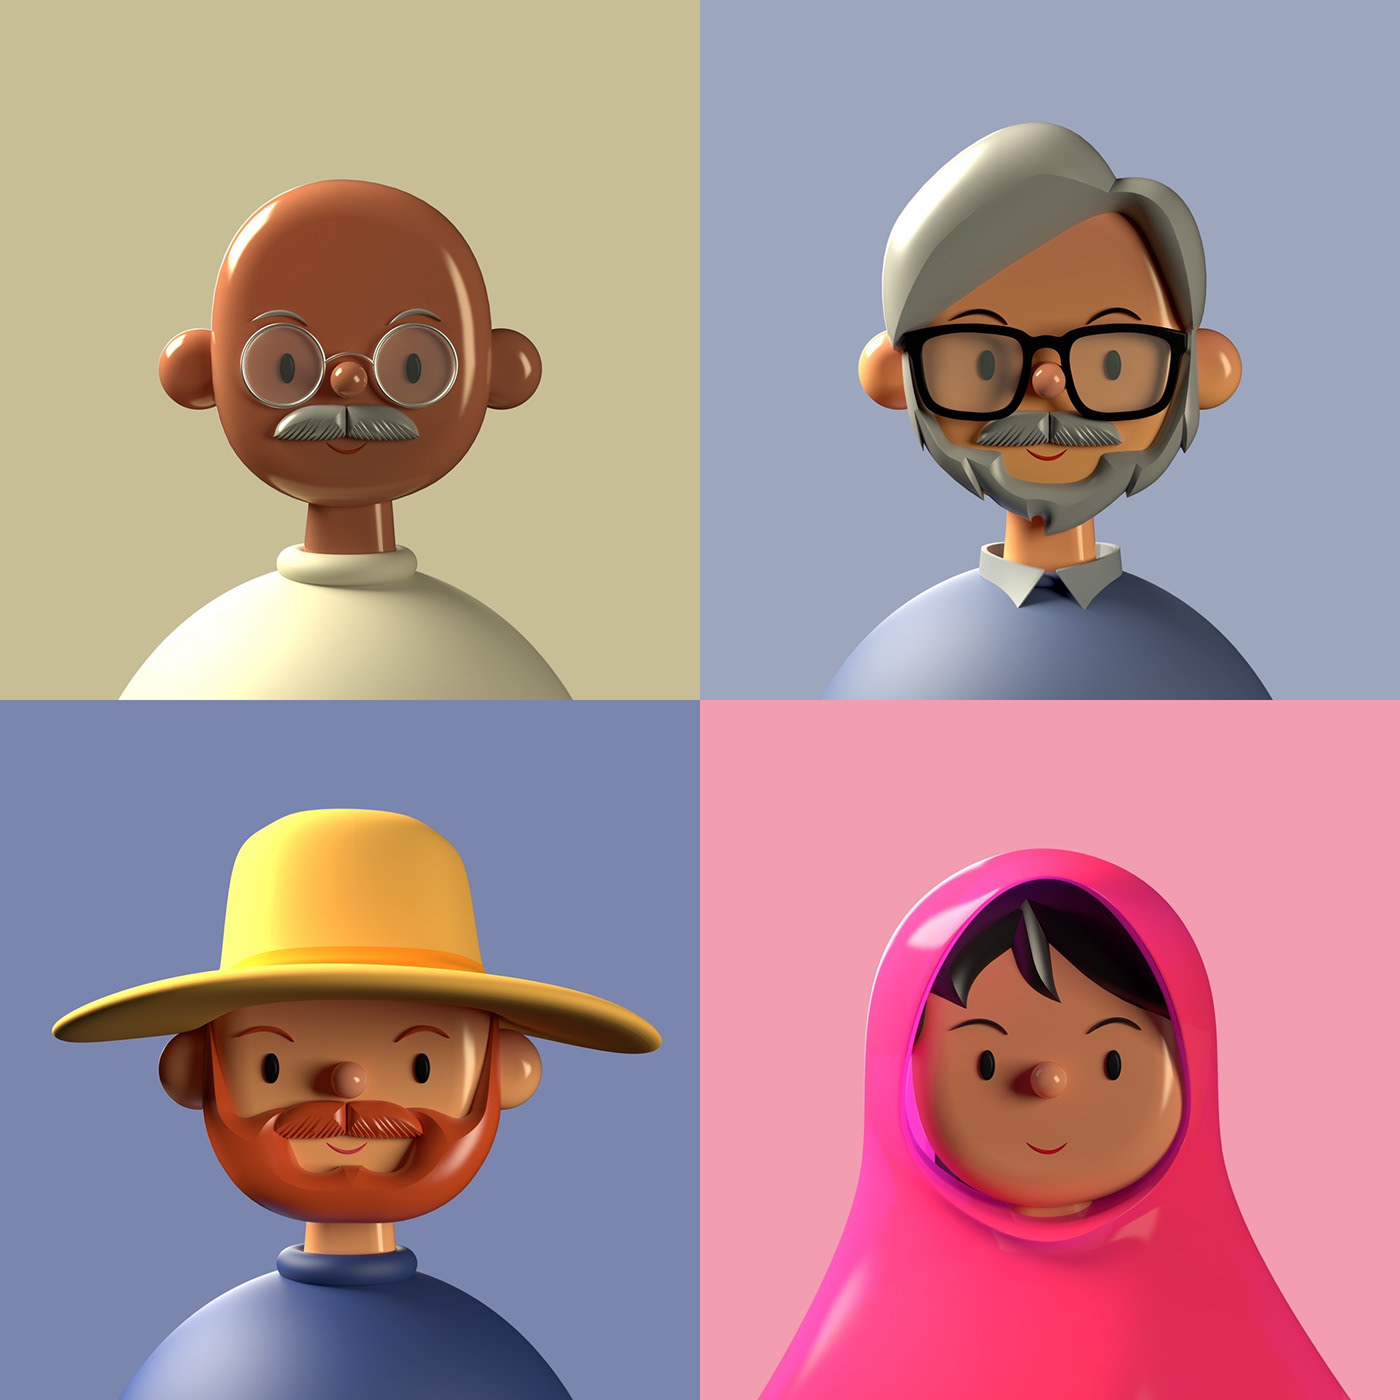 Toy Faces Library  Diverse 3D Avatars on Behance